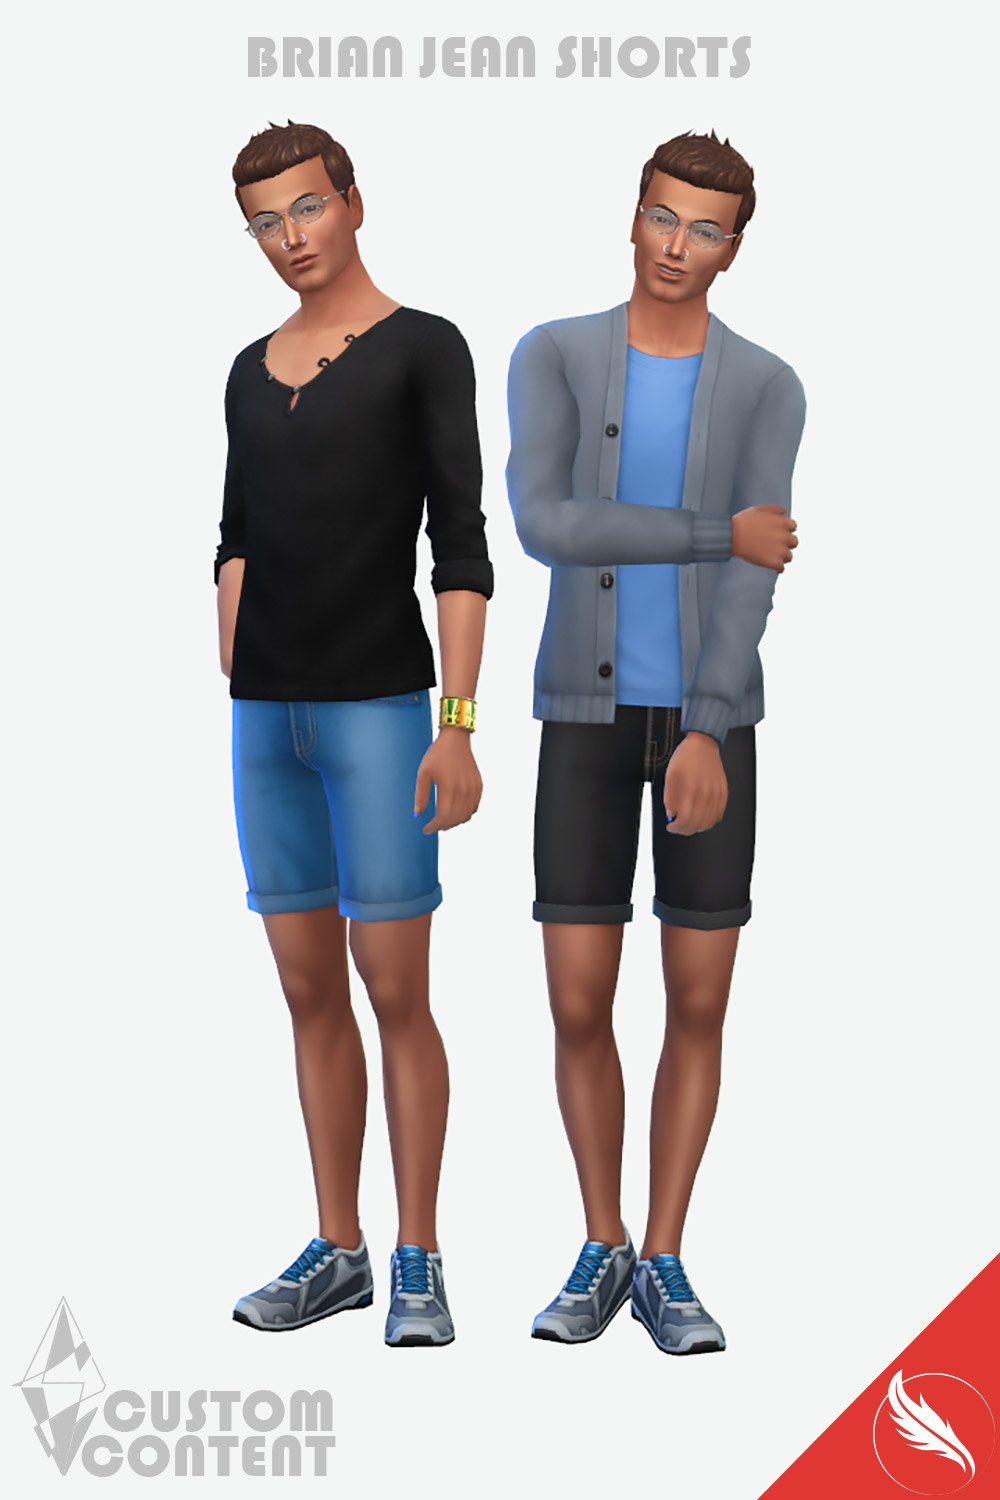 The Sims 4 Male Clothing